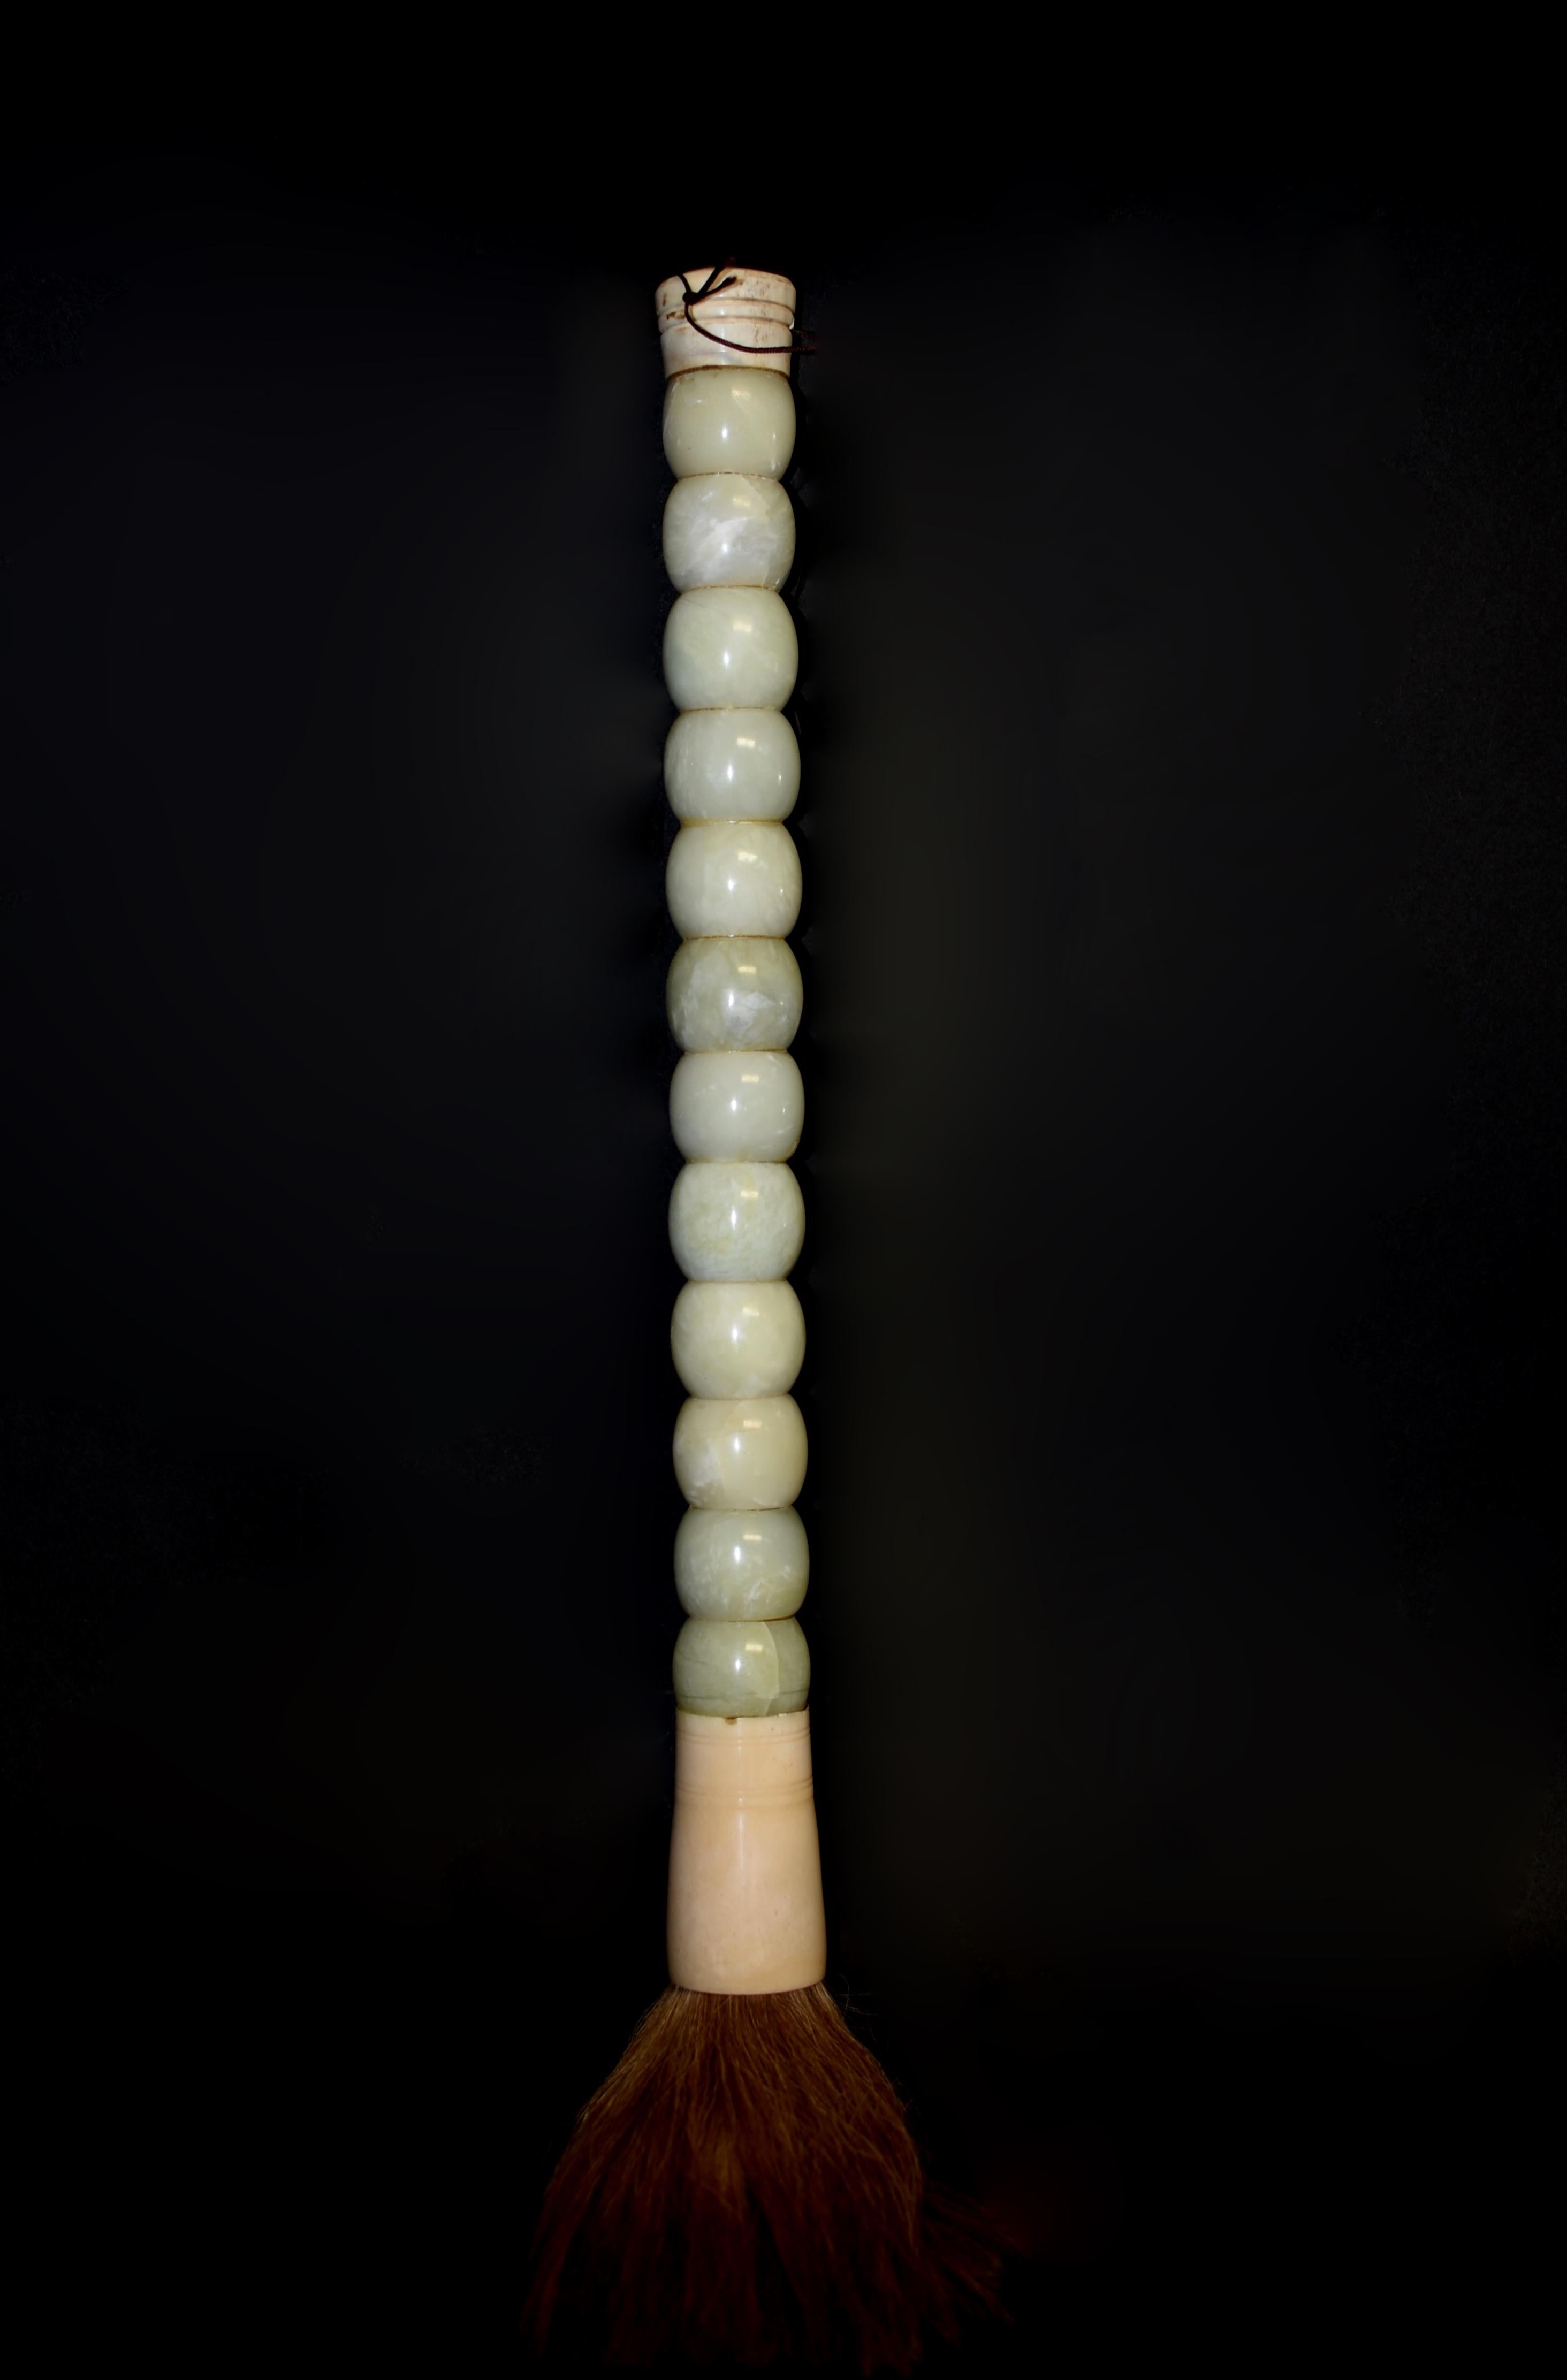 This is a very large, substantial brush with 12 jade gemstone beads. Beads in barrel shape, hand made with polished celadon jade gemstones. Bone ferrule and horse hair. This exceptional brush is 21